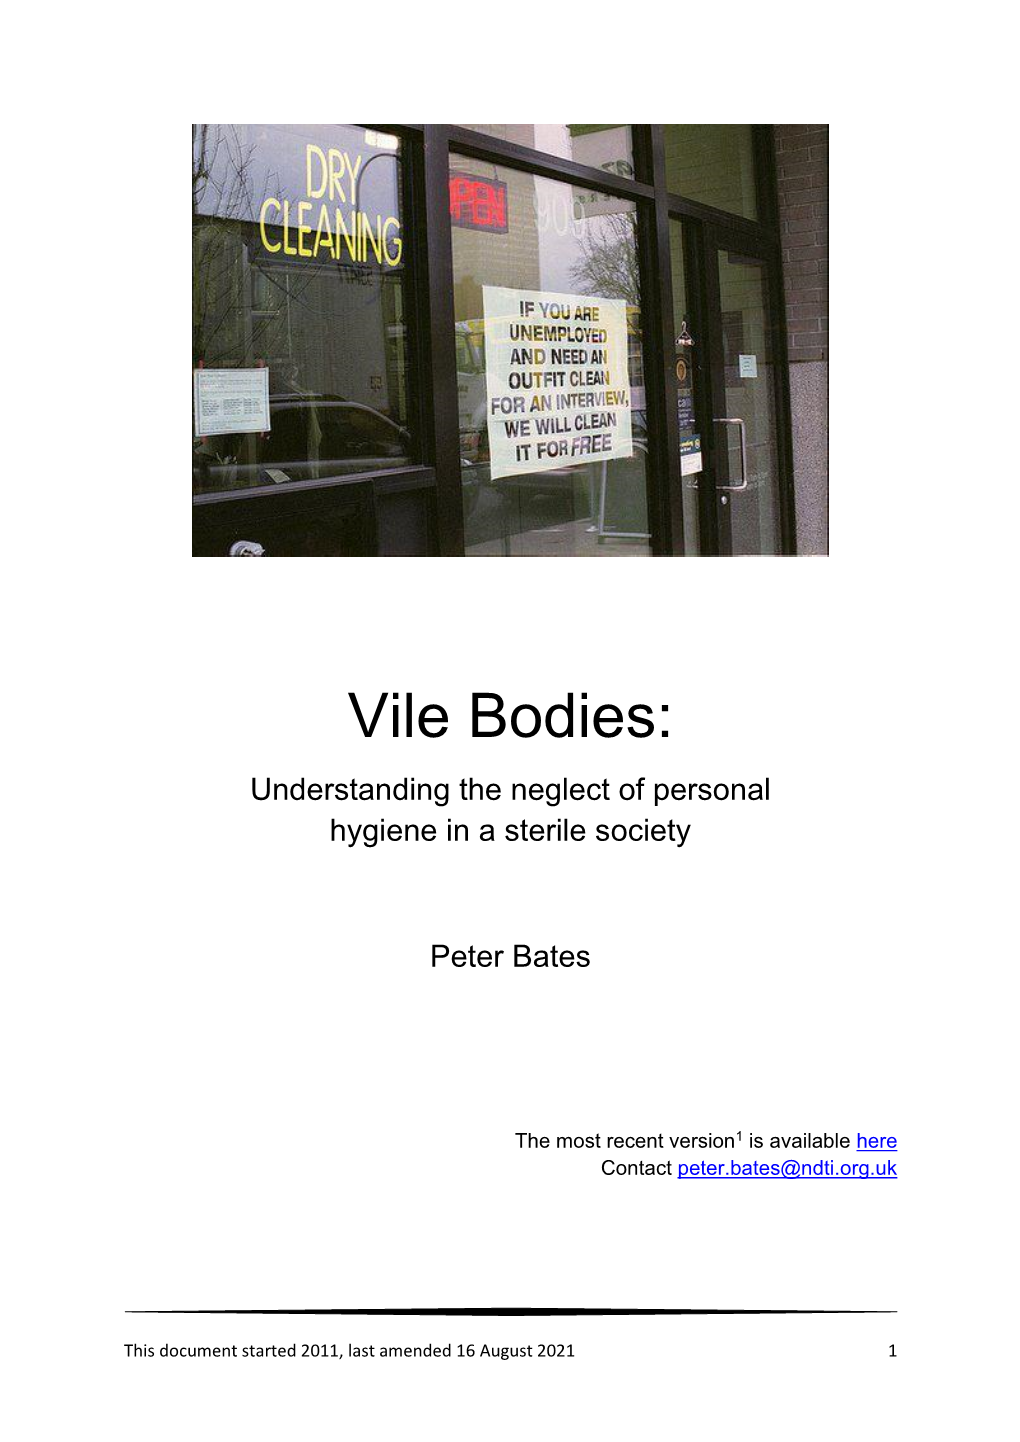 Vile Bodies: Understanding the Neglect of Personal Hygiene in a Sterile Society